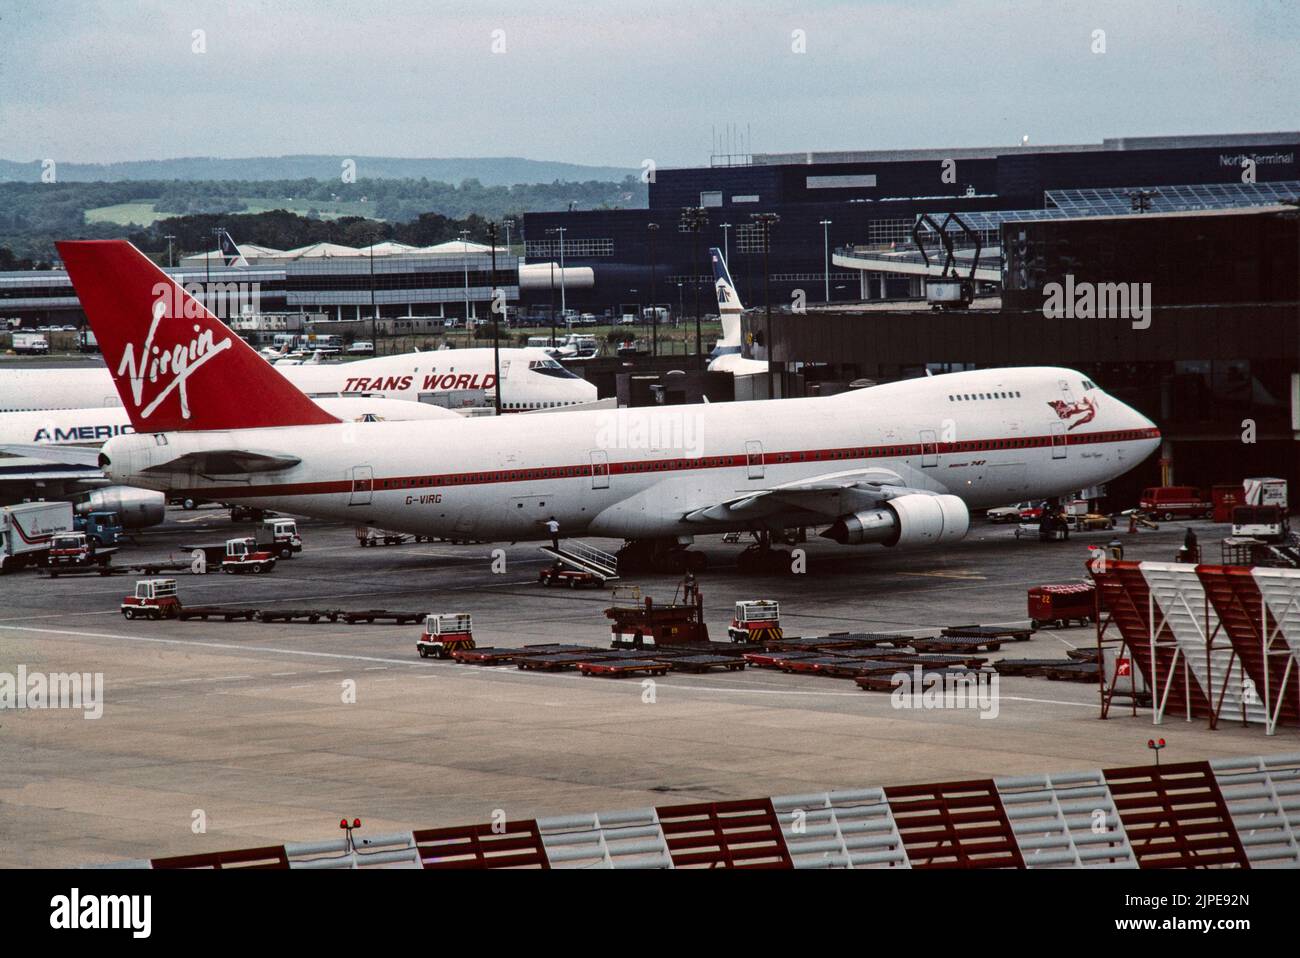 A Virgin Airways Boeing 747-200 Airliner, G-VIRG,  at London Gatwick Airport in 1988. This was Virgin's first 747 Jumbo Jet. Stock Photo